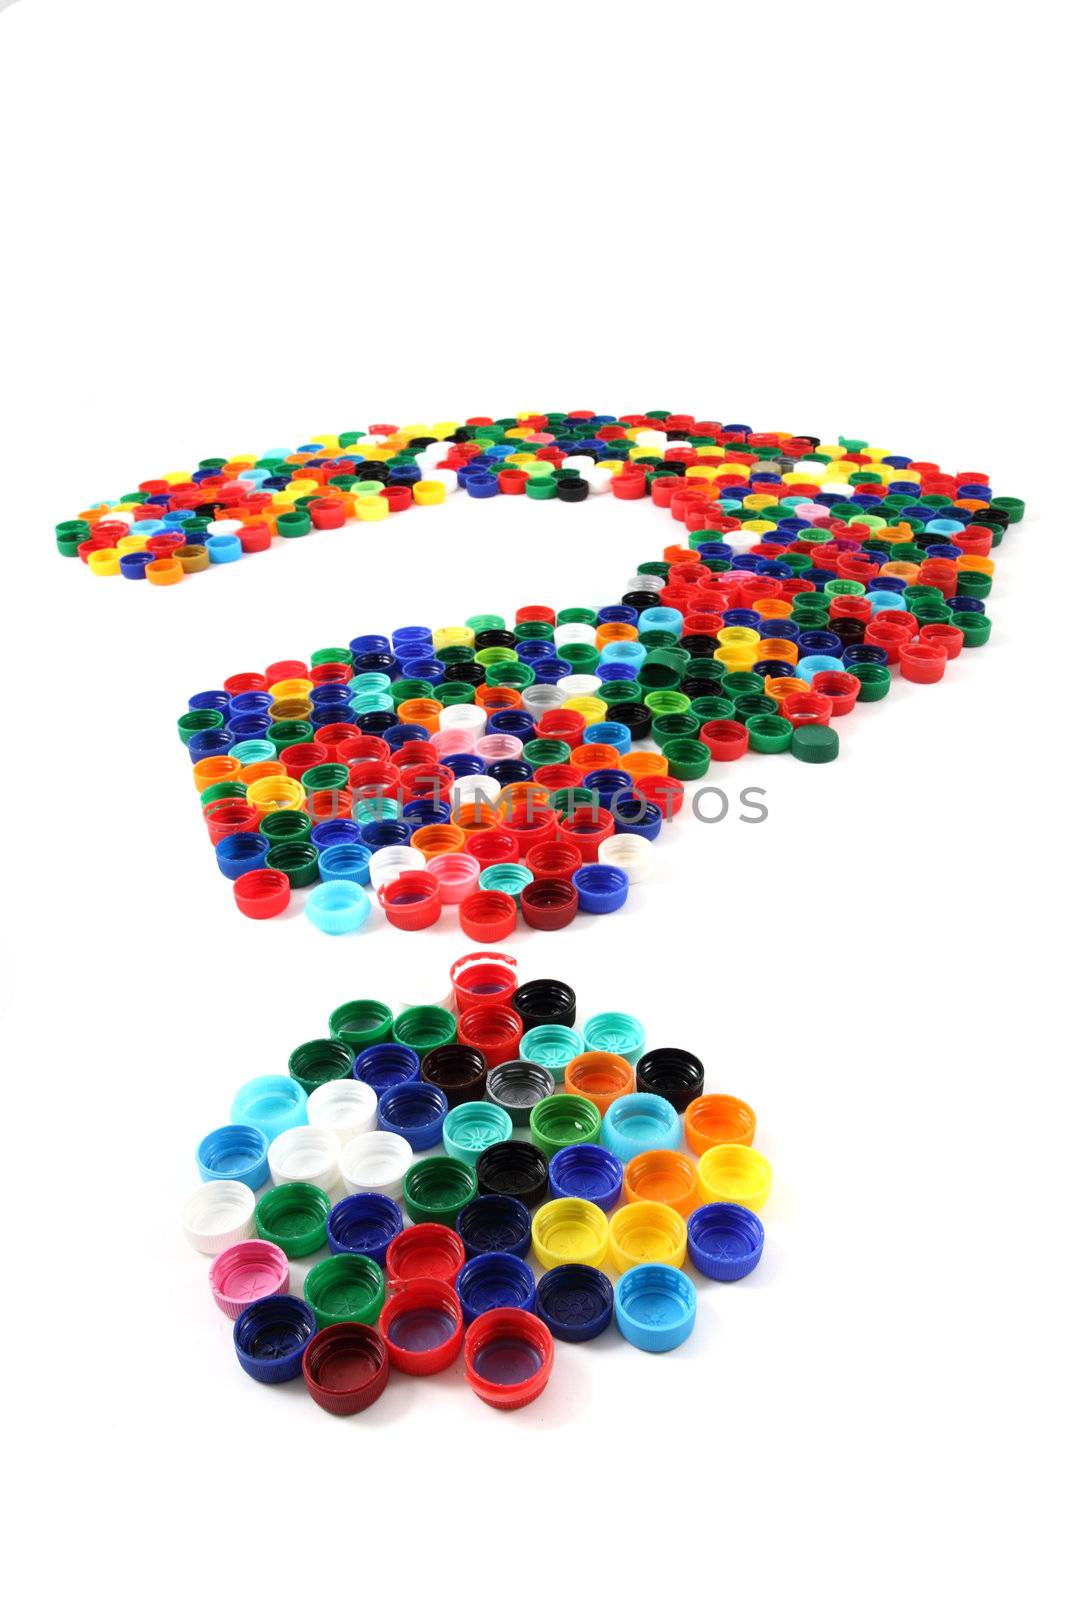 question symbol from color caps  by jonnysek